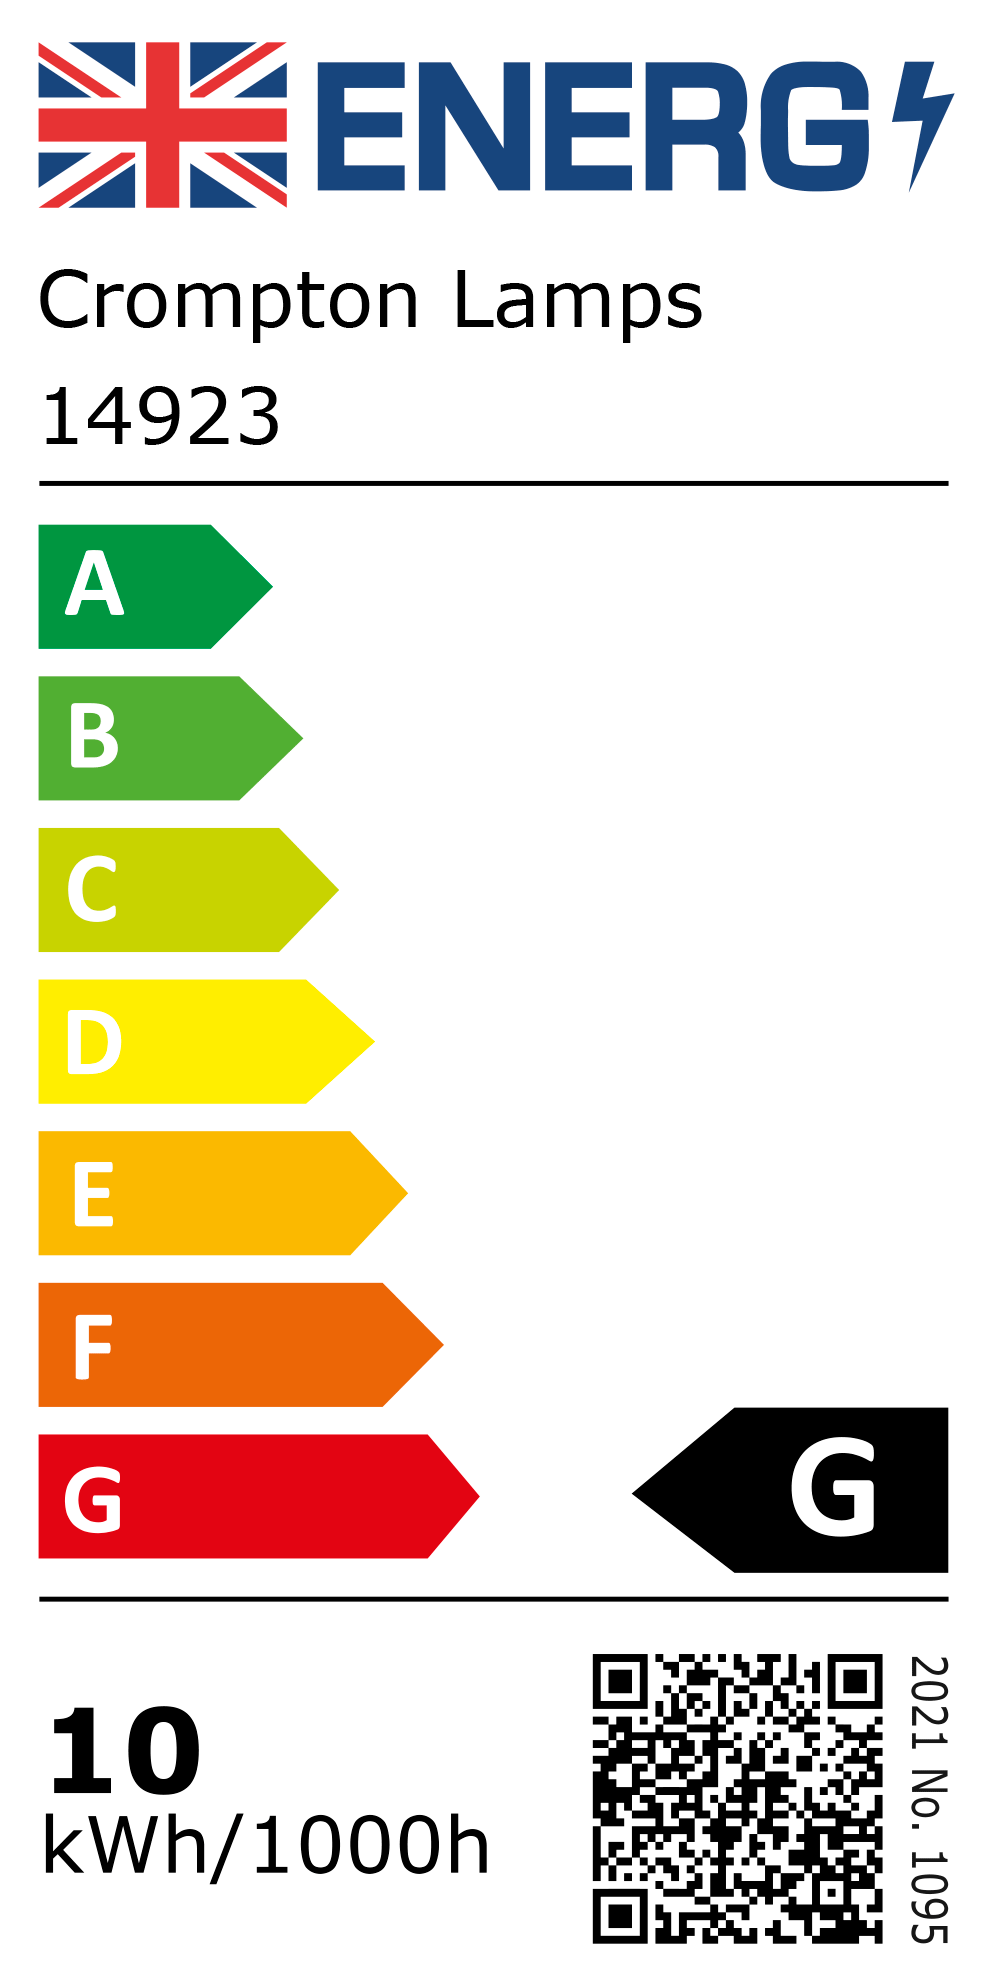 New 2021 Energy Rating Label: MPN 14923